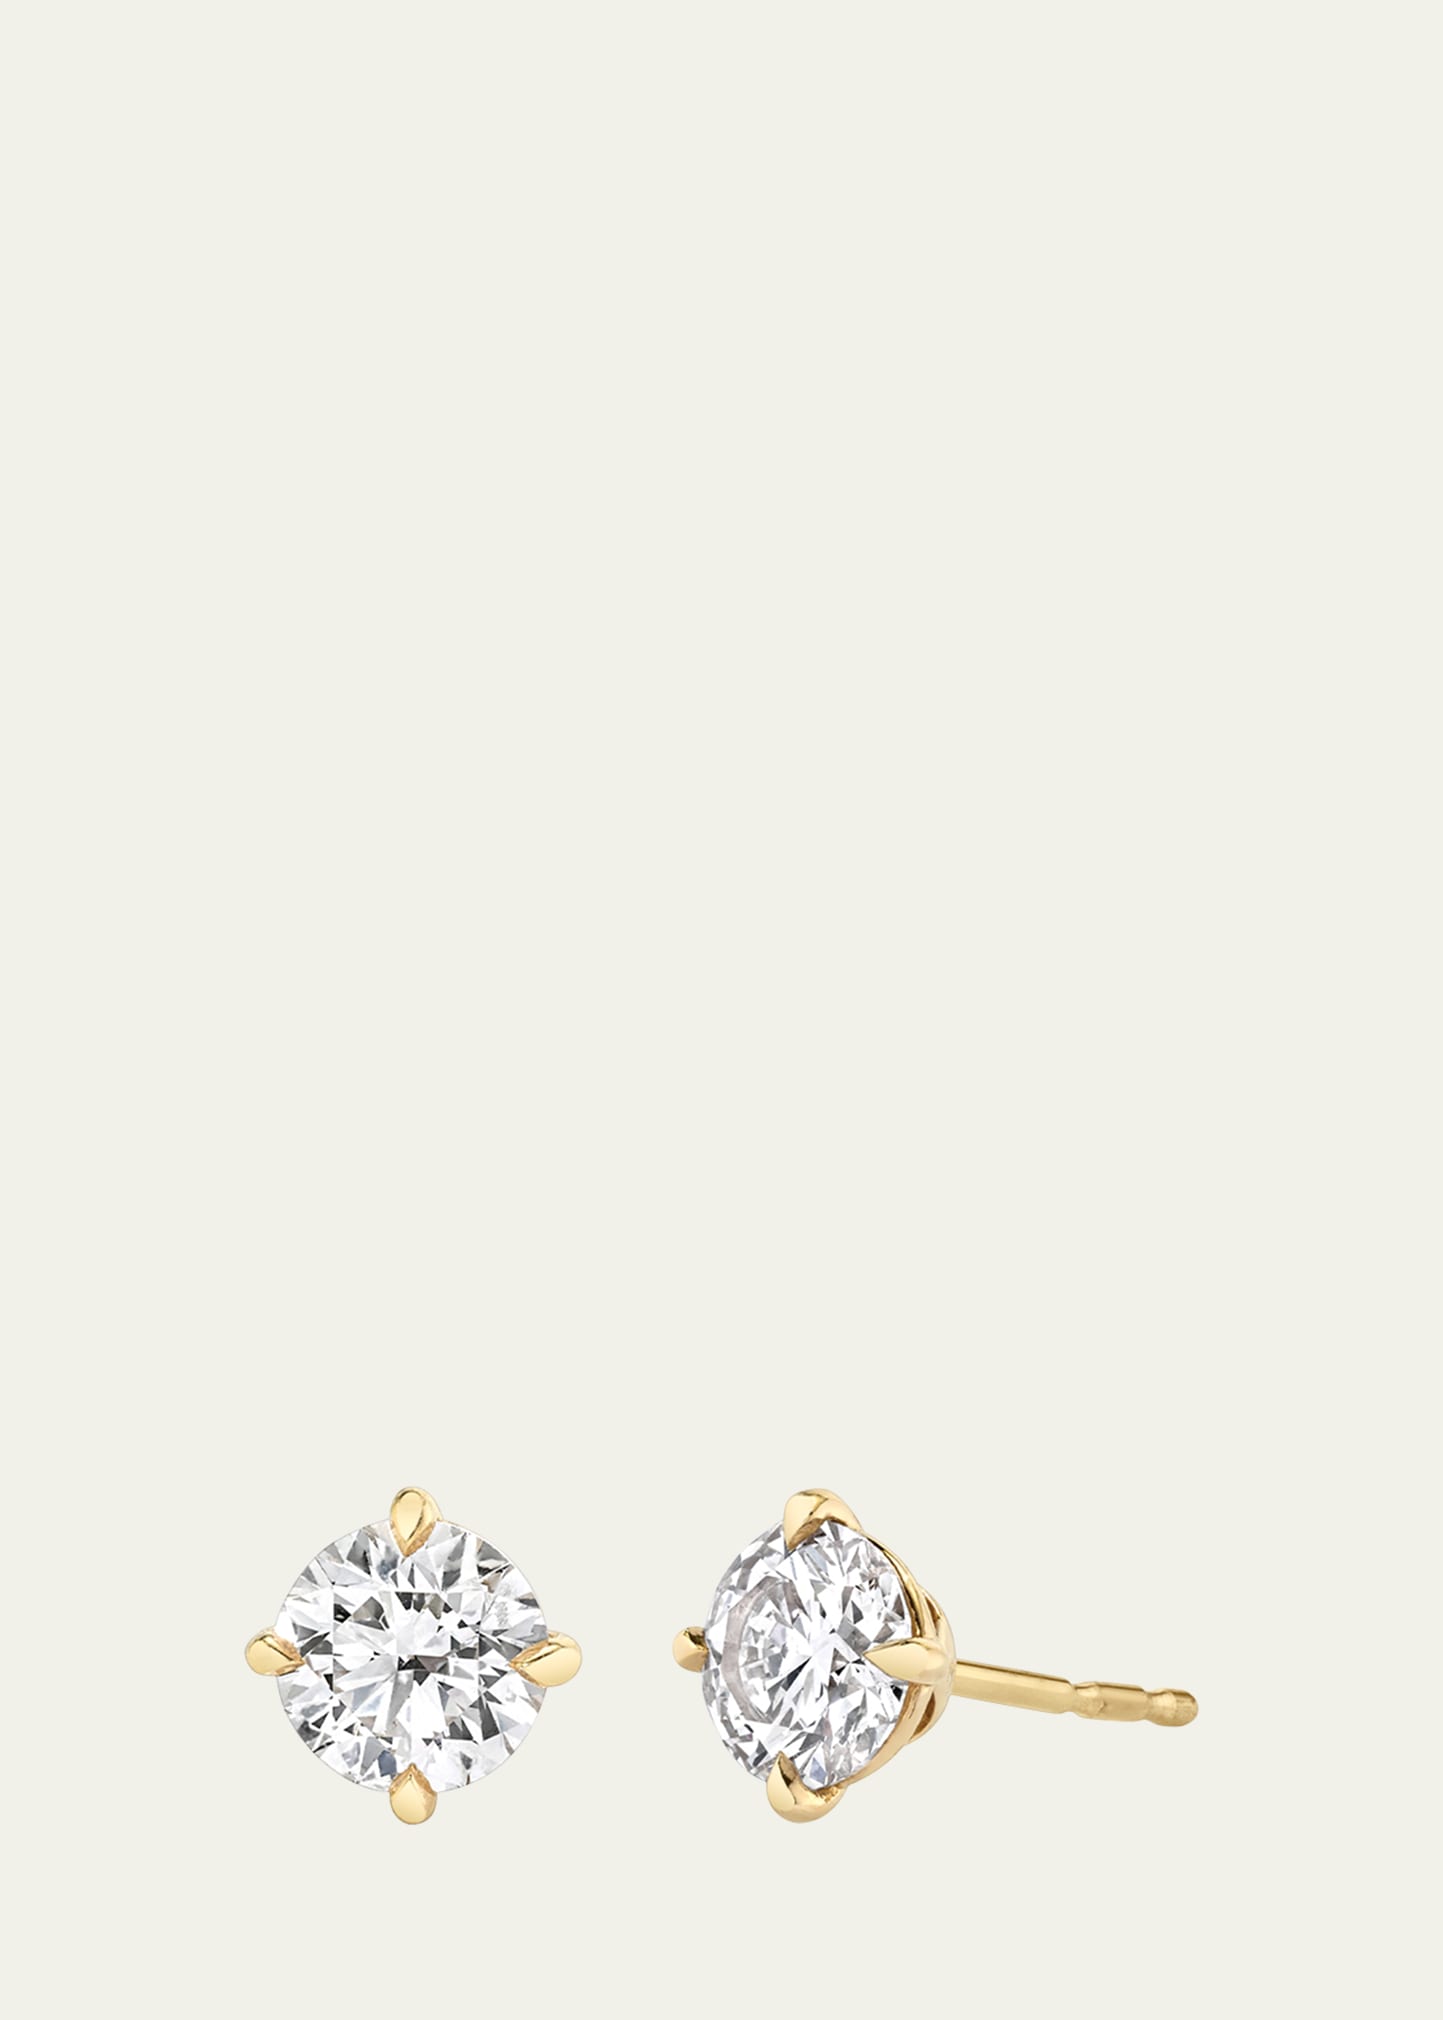 Vrai 14k Brilliant Round Lab Created/ Created Diamond Solitaire Stud Earrings, 3.0tcw In Gold